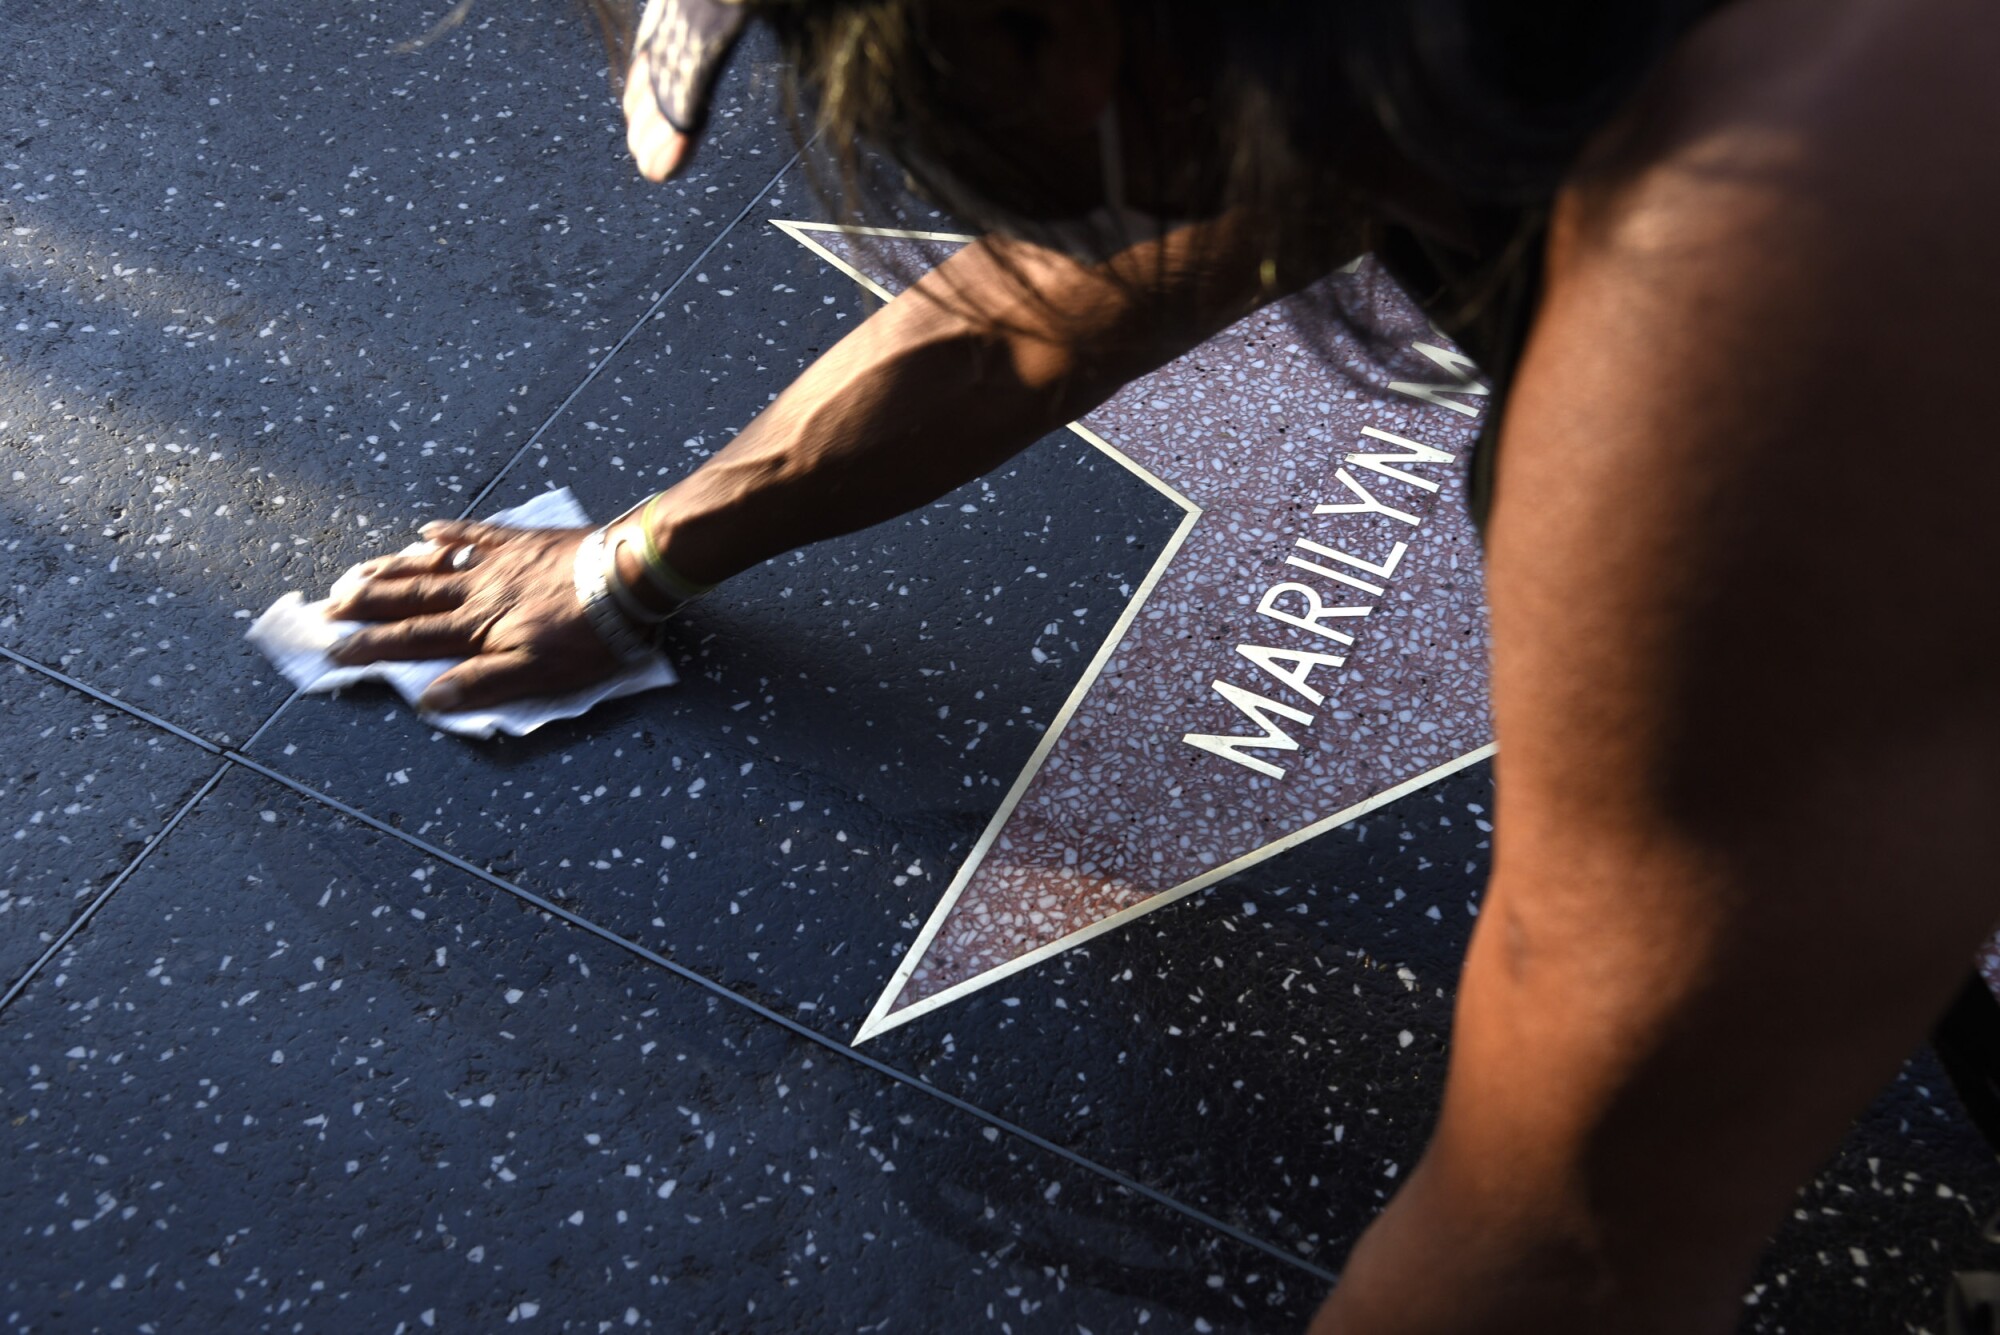 latest news Photos: Marilyn Monroe’s star still shines brightly, 60 years after her death